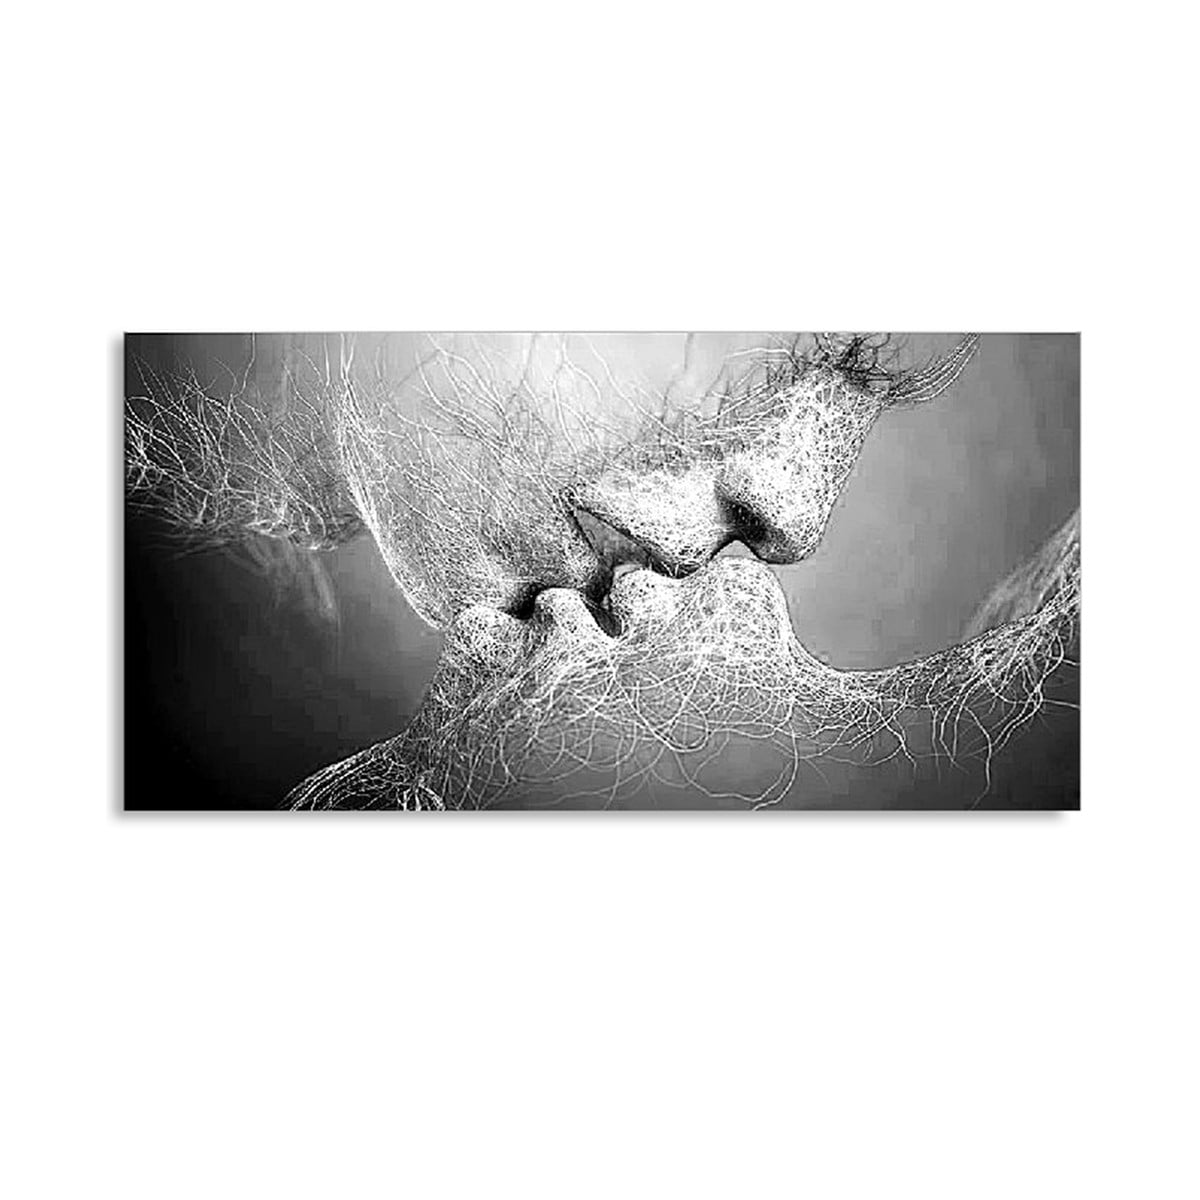 Black & White Love Kiss Abstract Art on Canvas Painting Wall Art Picture Print 